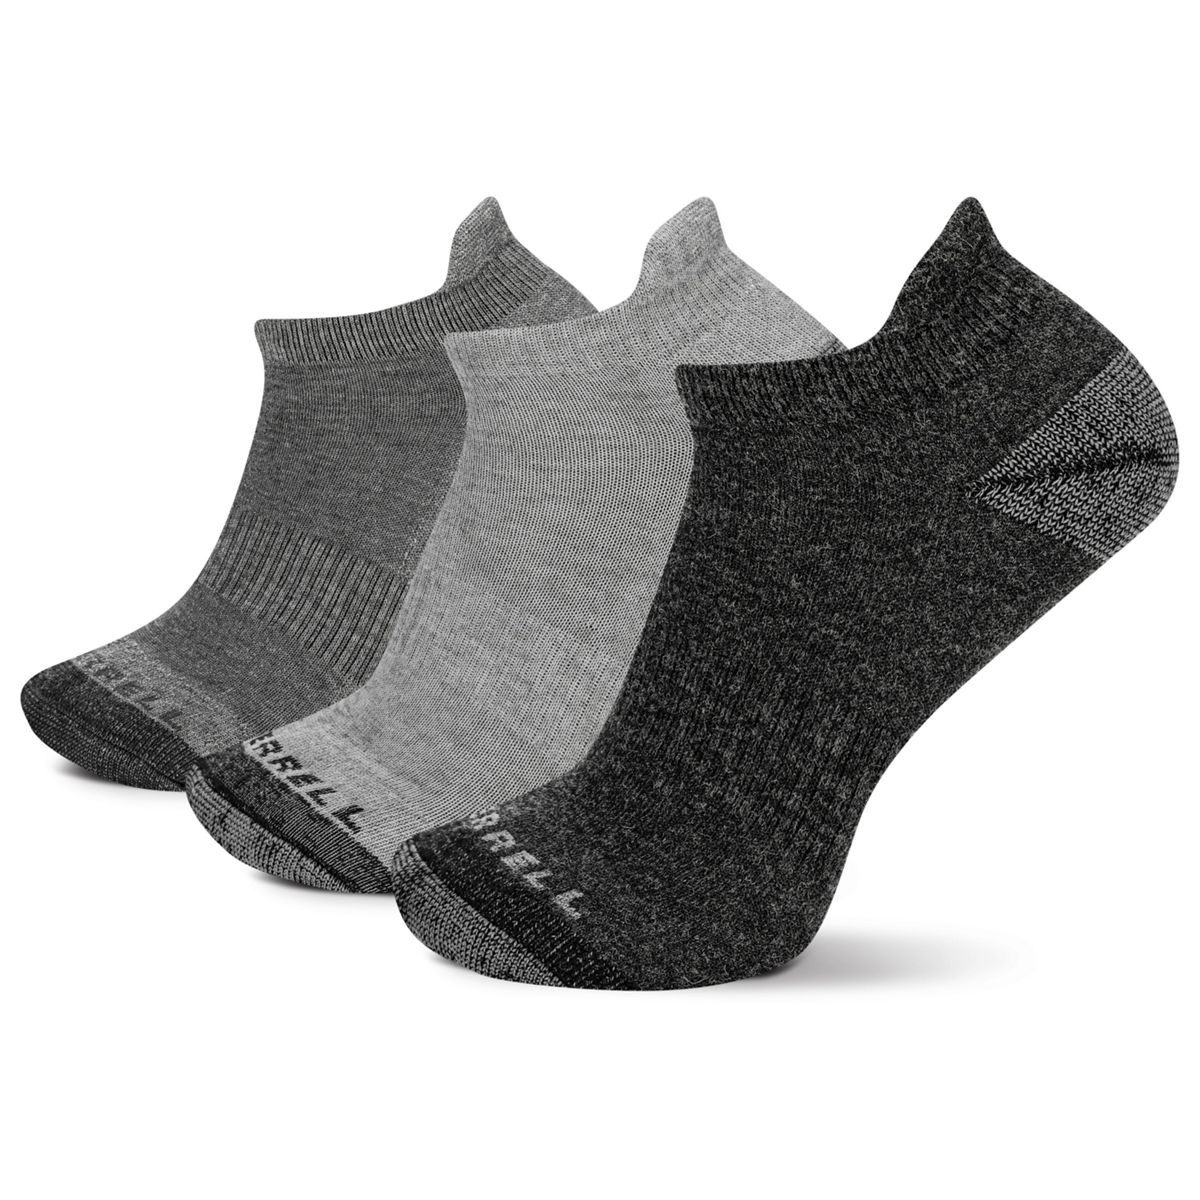 Wool Everyday Tab Sock 3 Pack, Charcoal/Black Assorted, dynamic